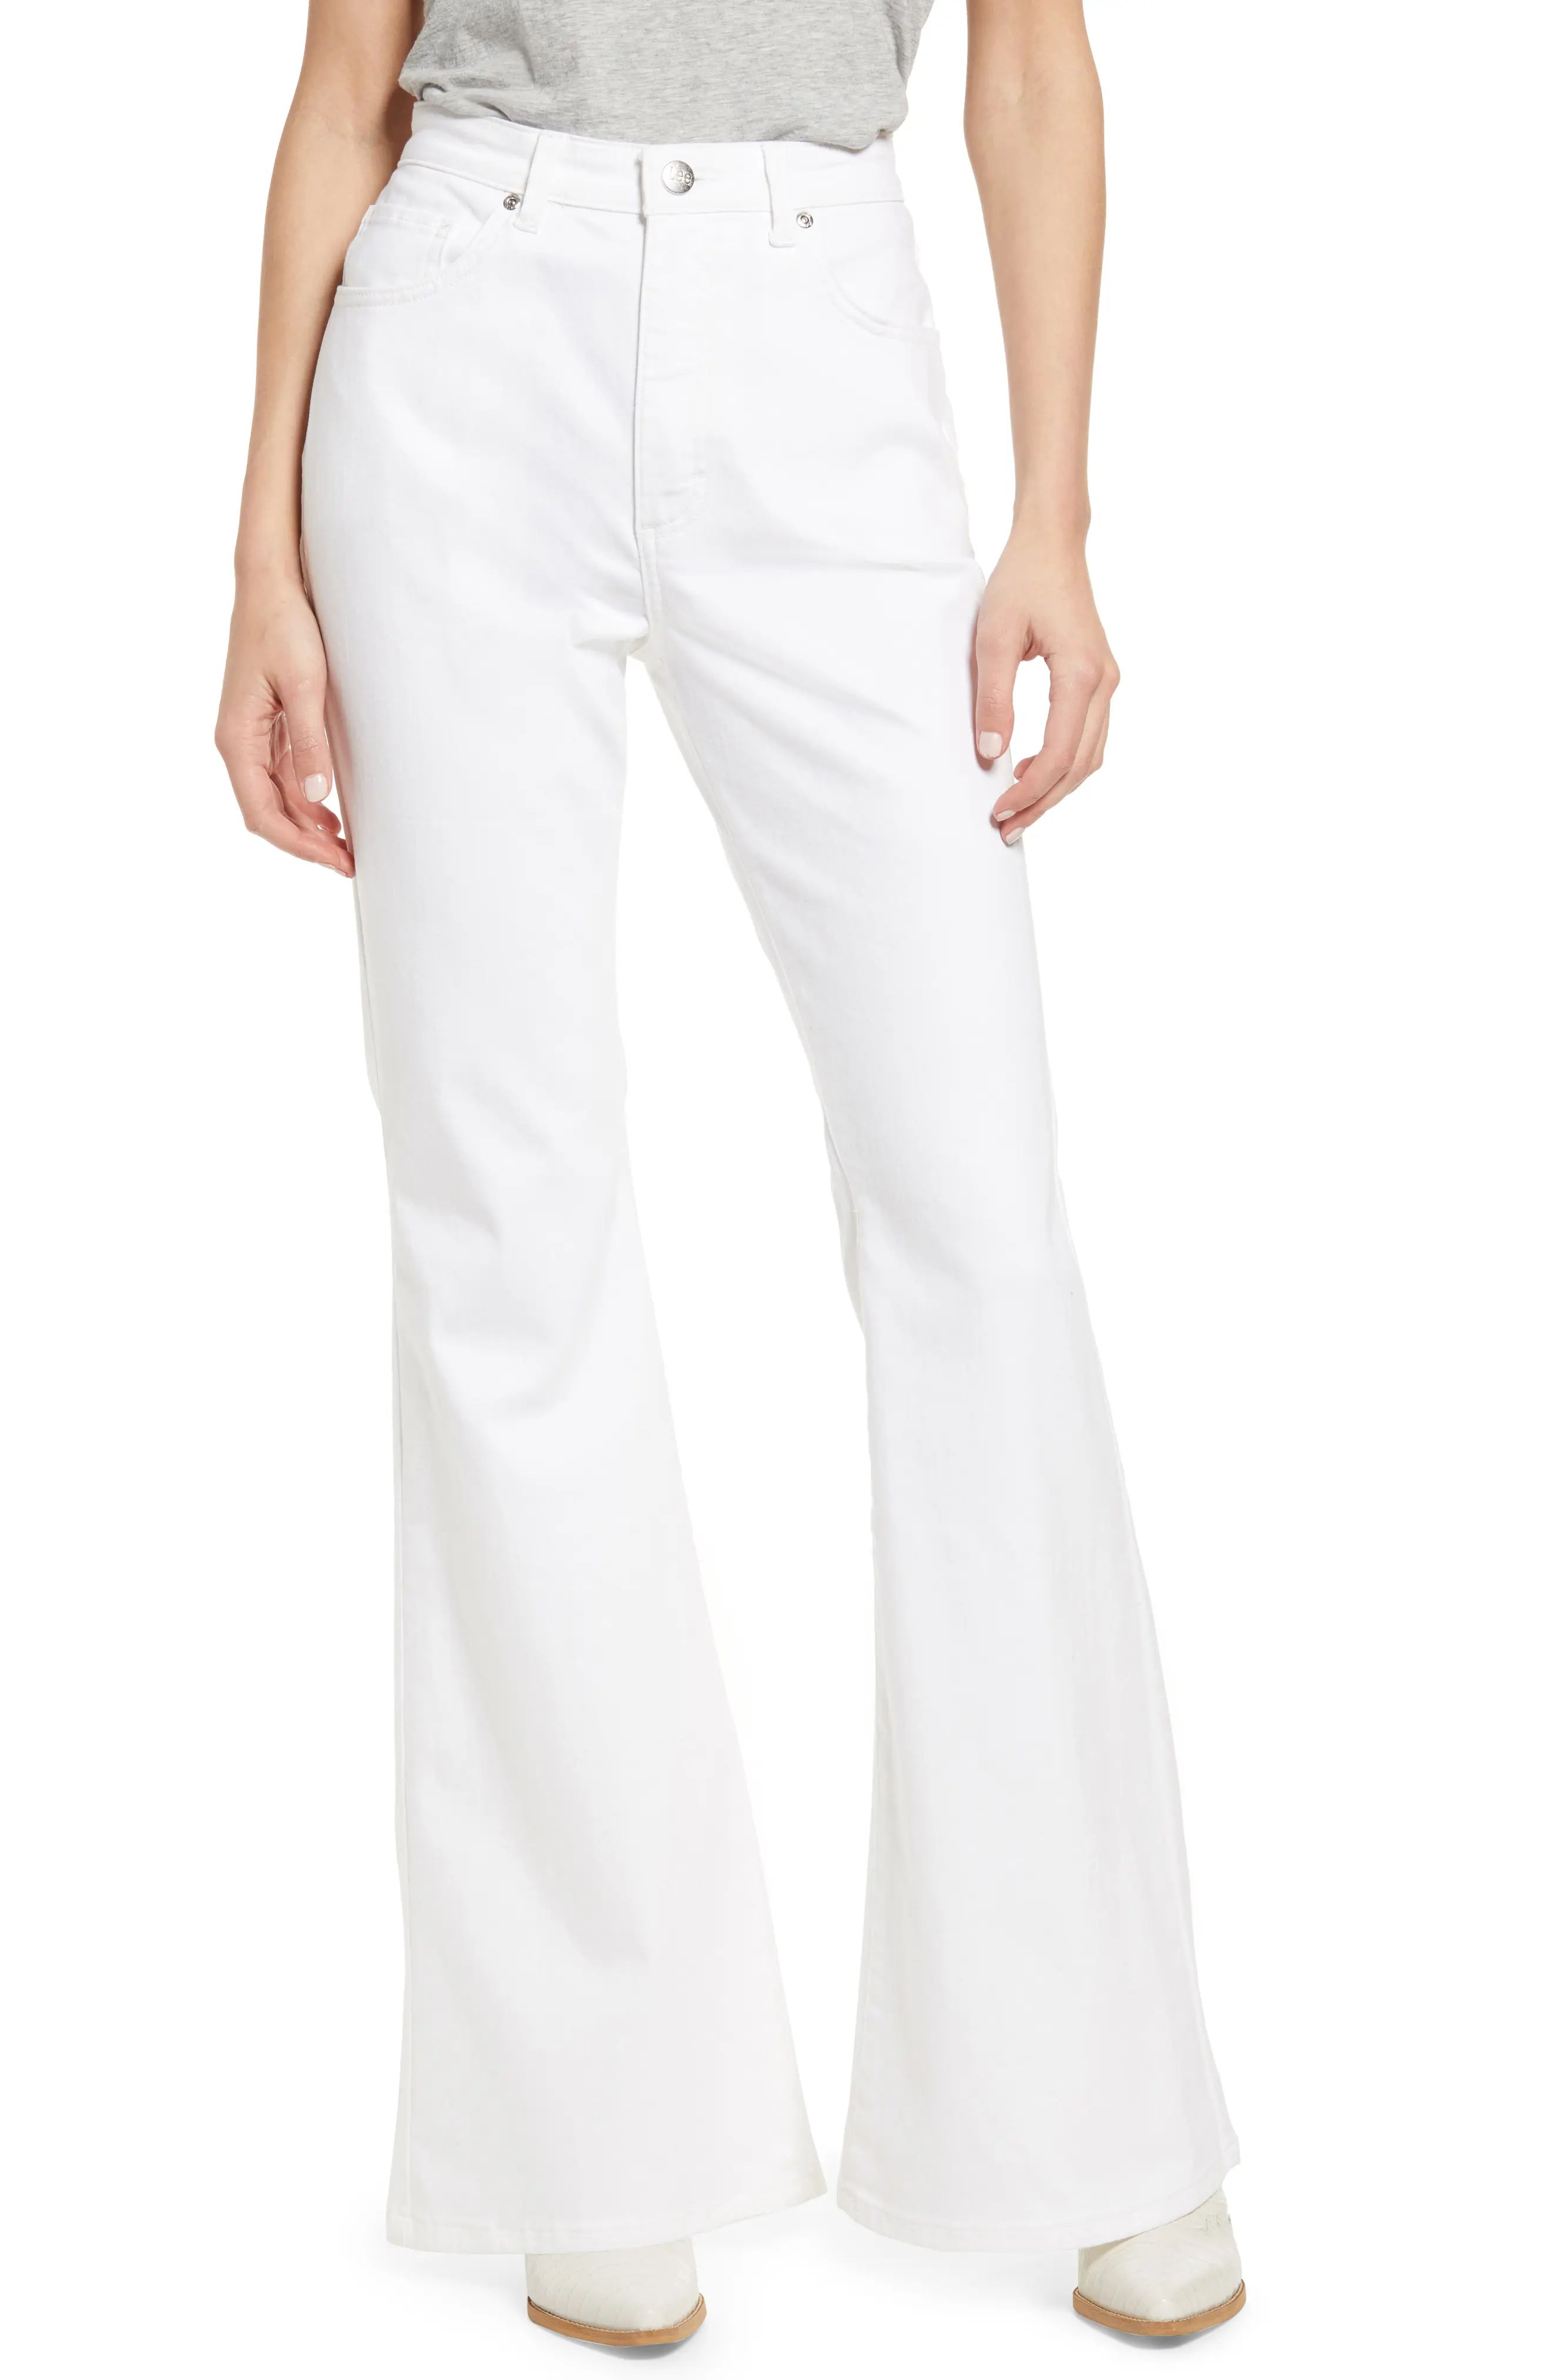 Lee High Waist Flare Jeans in White at Nordstrom, Size 24 | Nordstrom